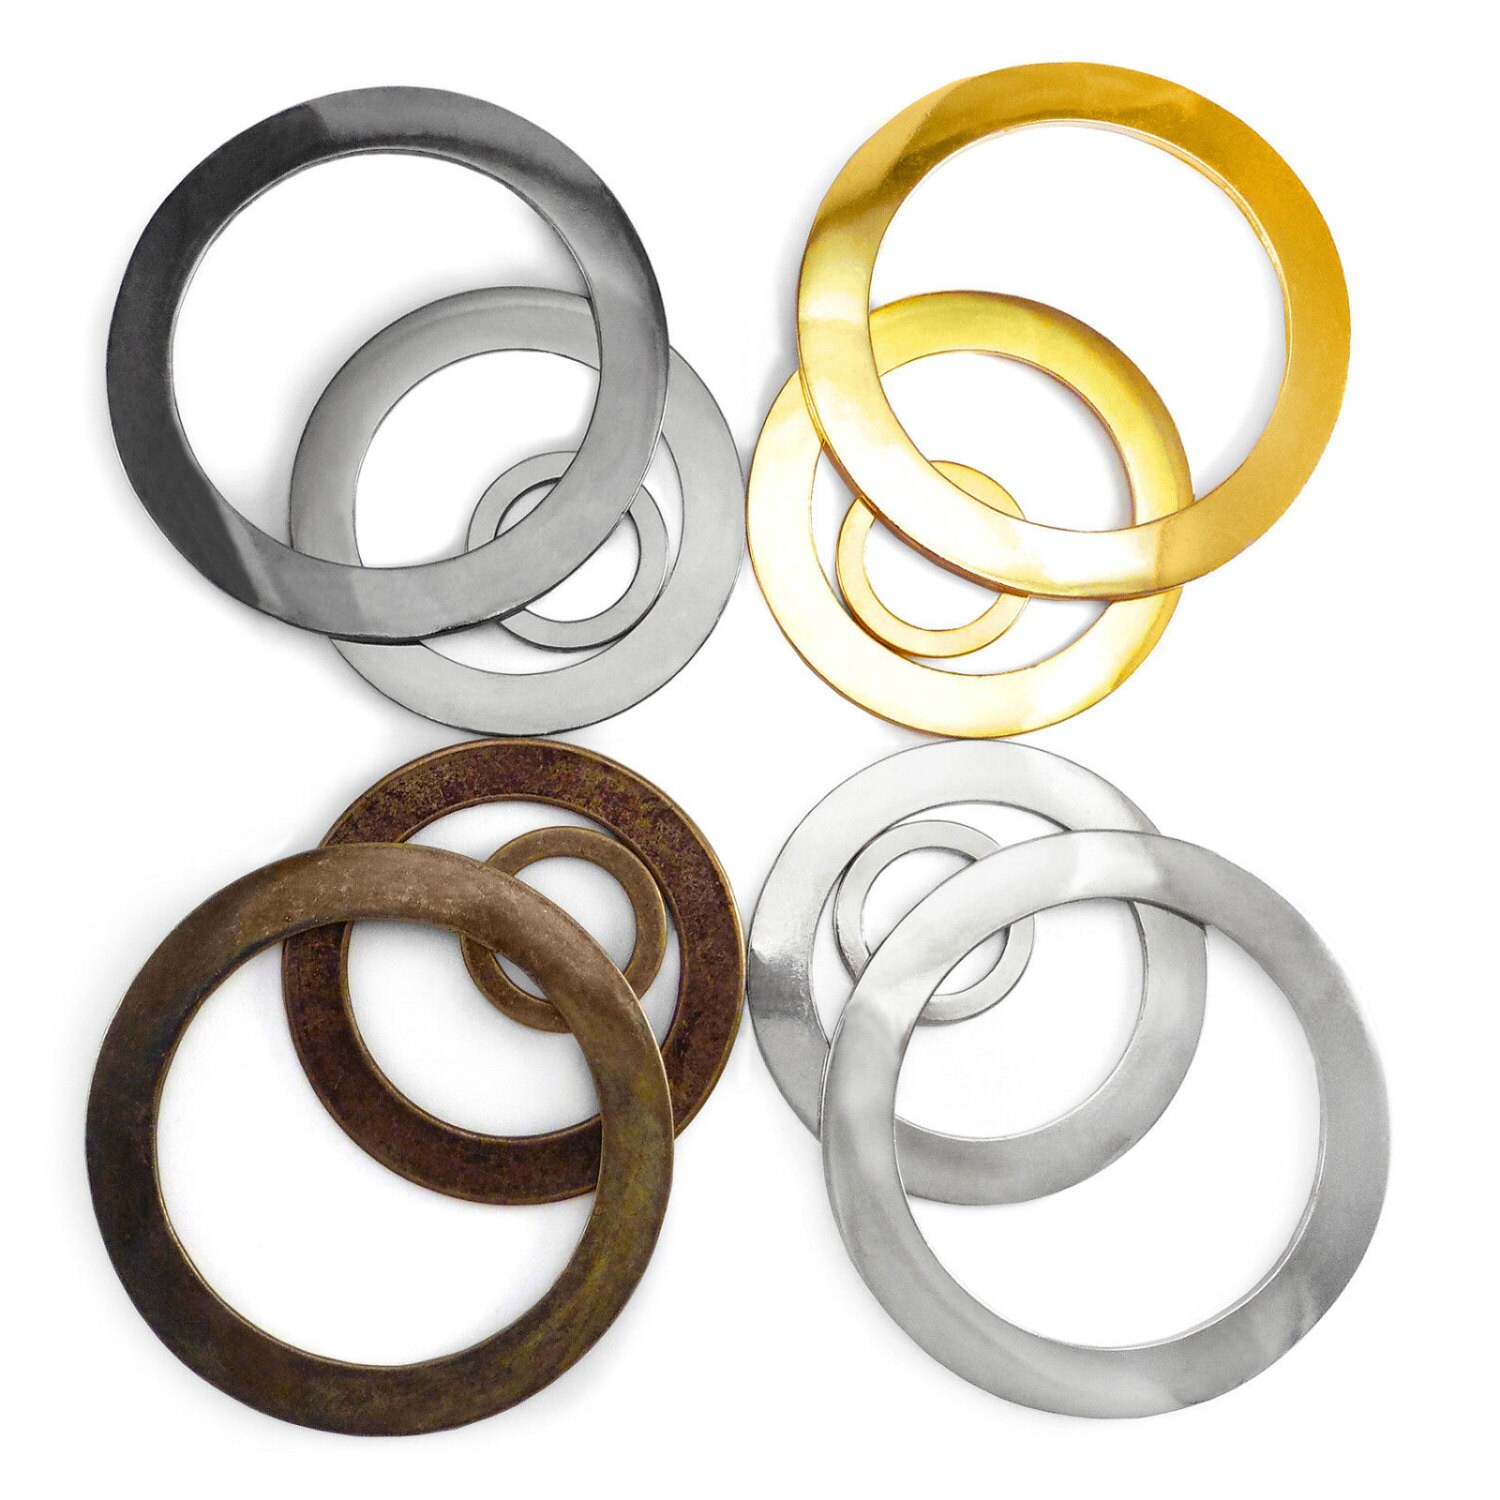 Large solid cast wide O rings metal bags collars craft 30 66